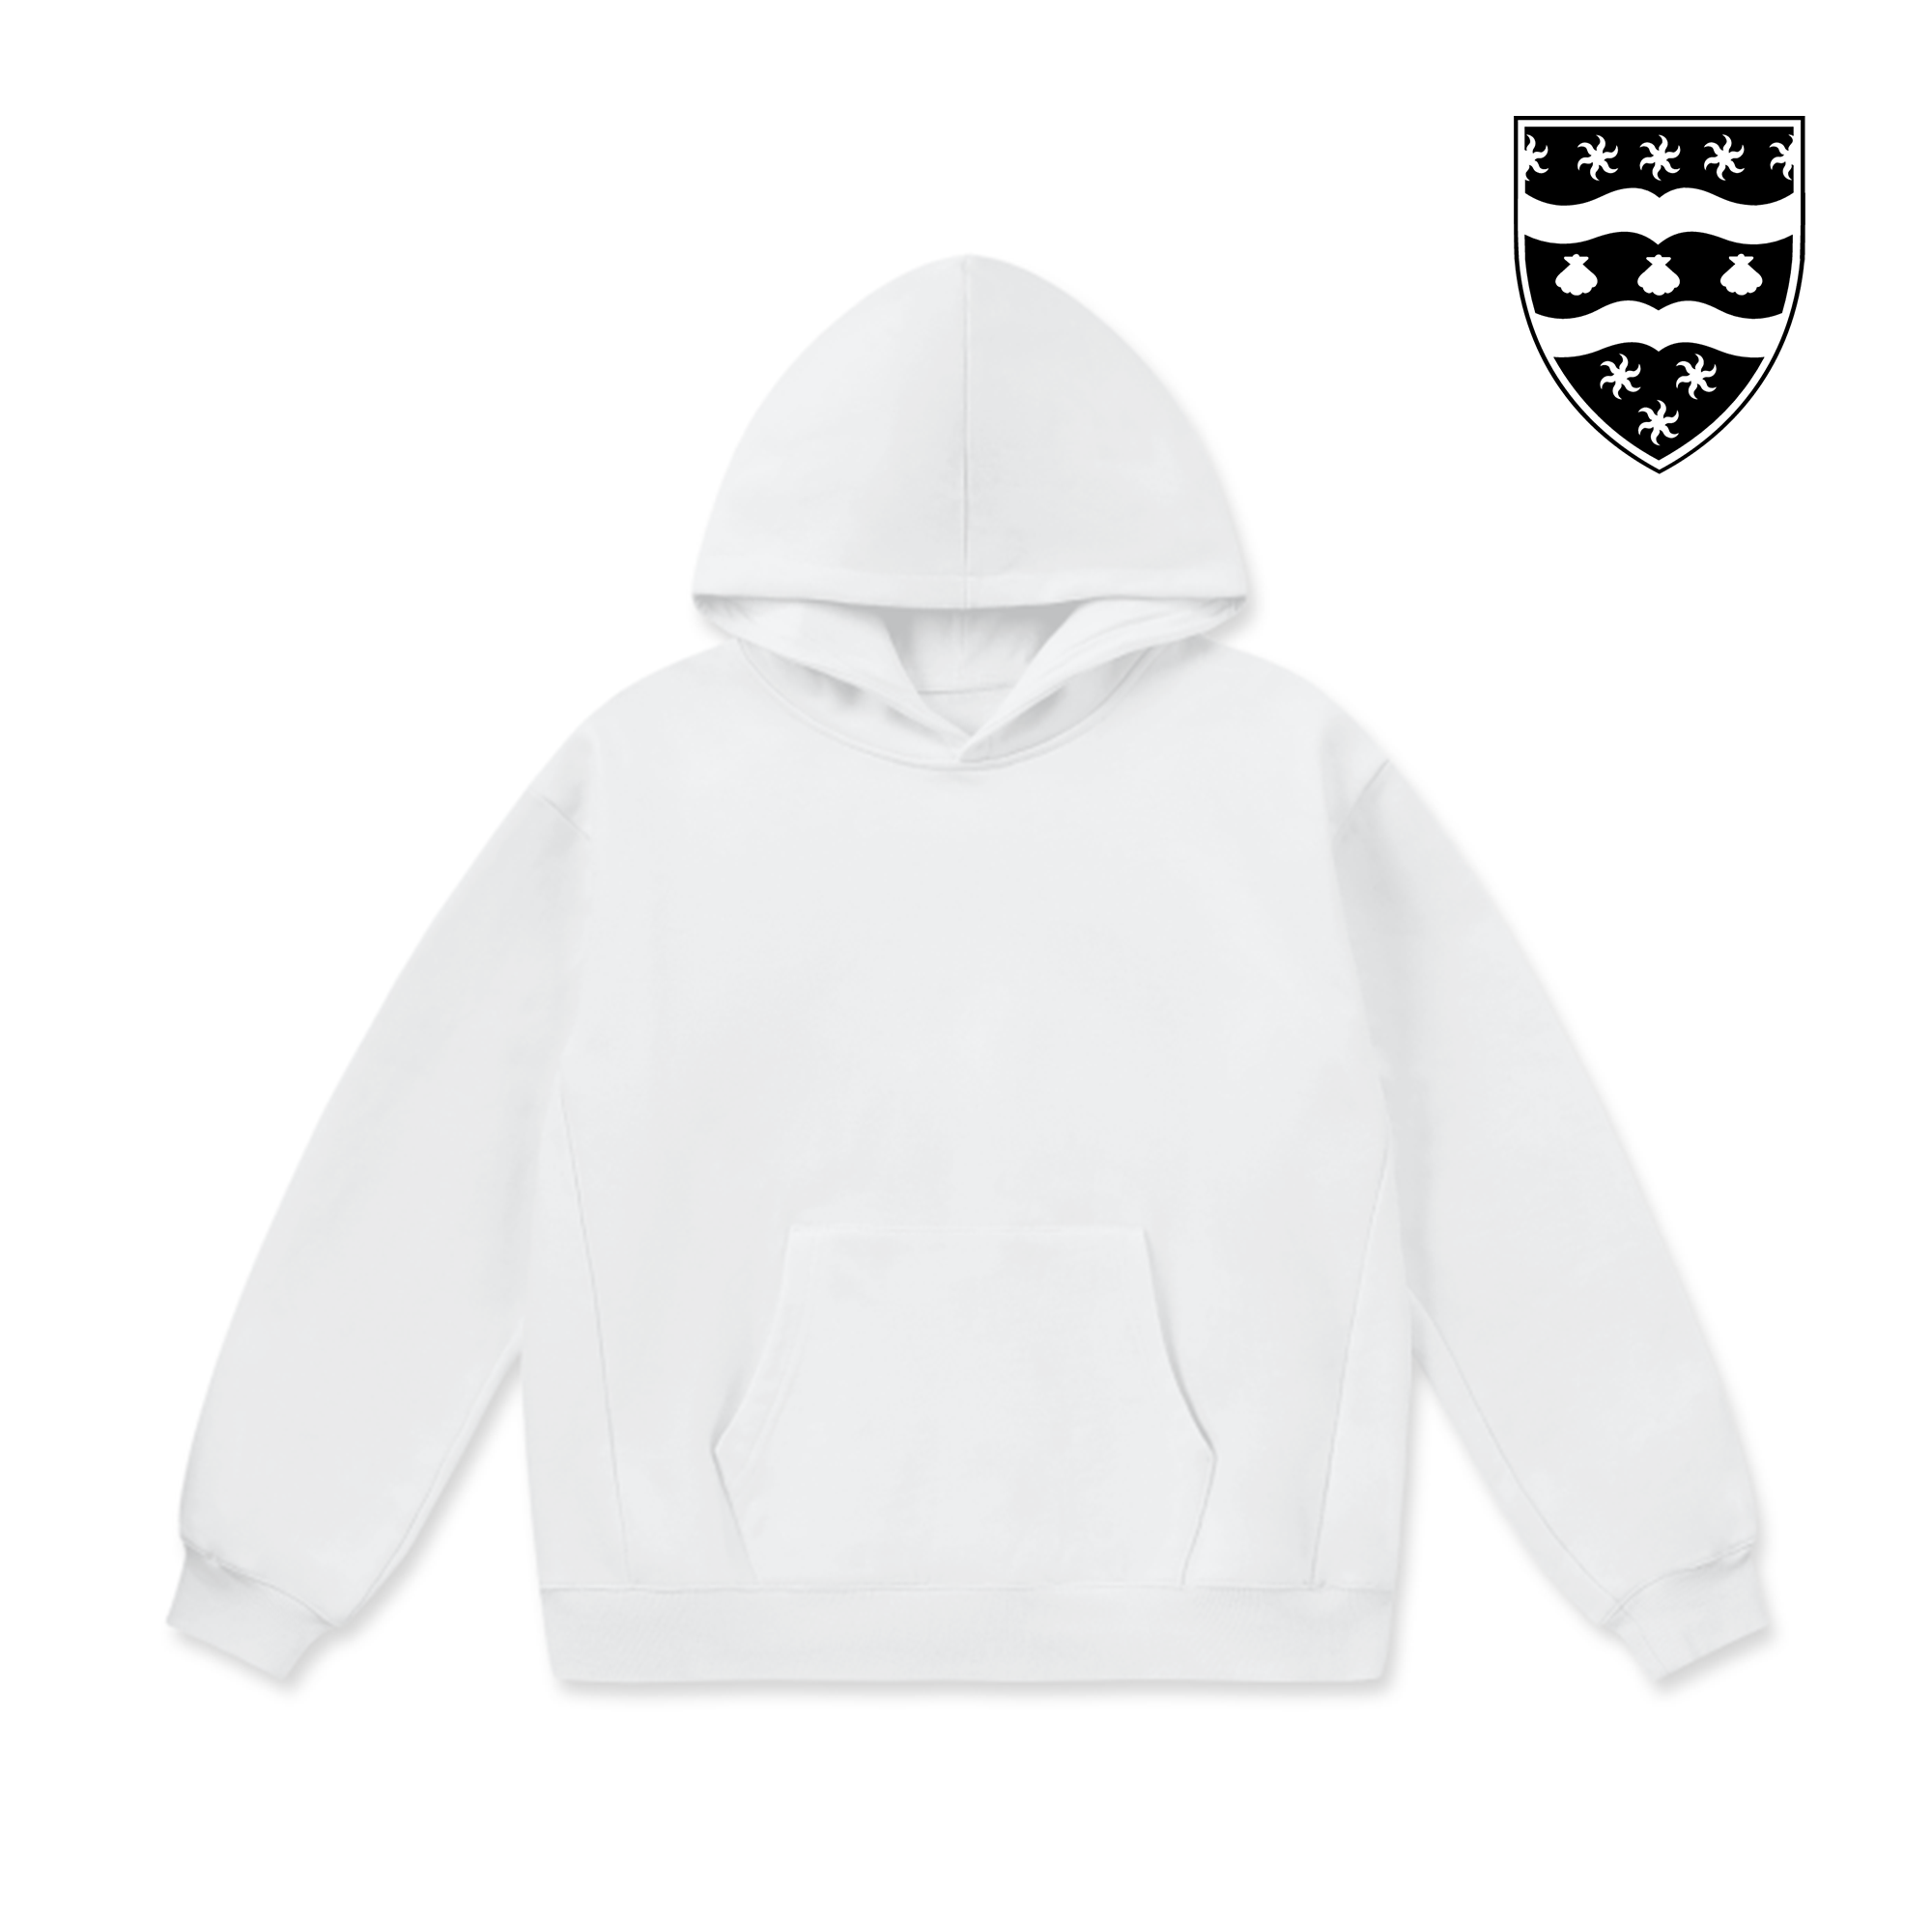 LCC Super Weighted Hoodie - University of Plymouth (Classic)